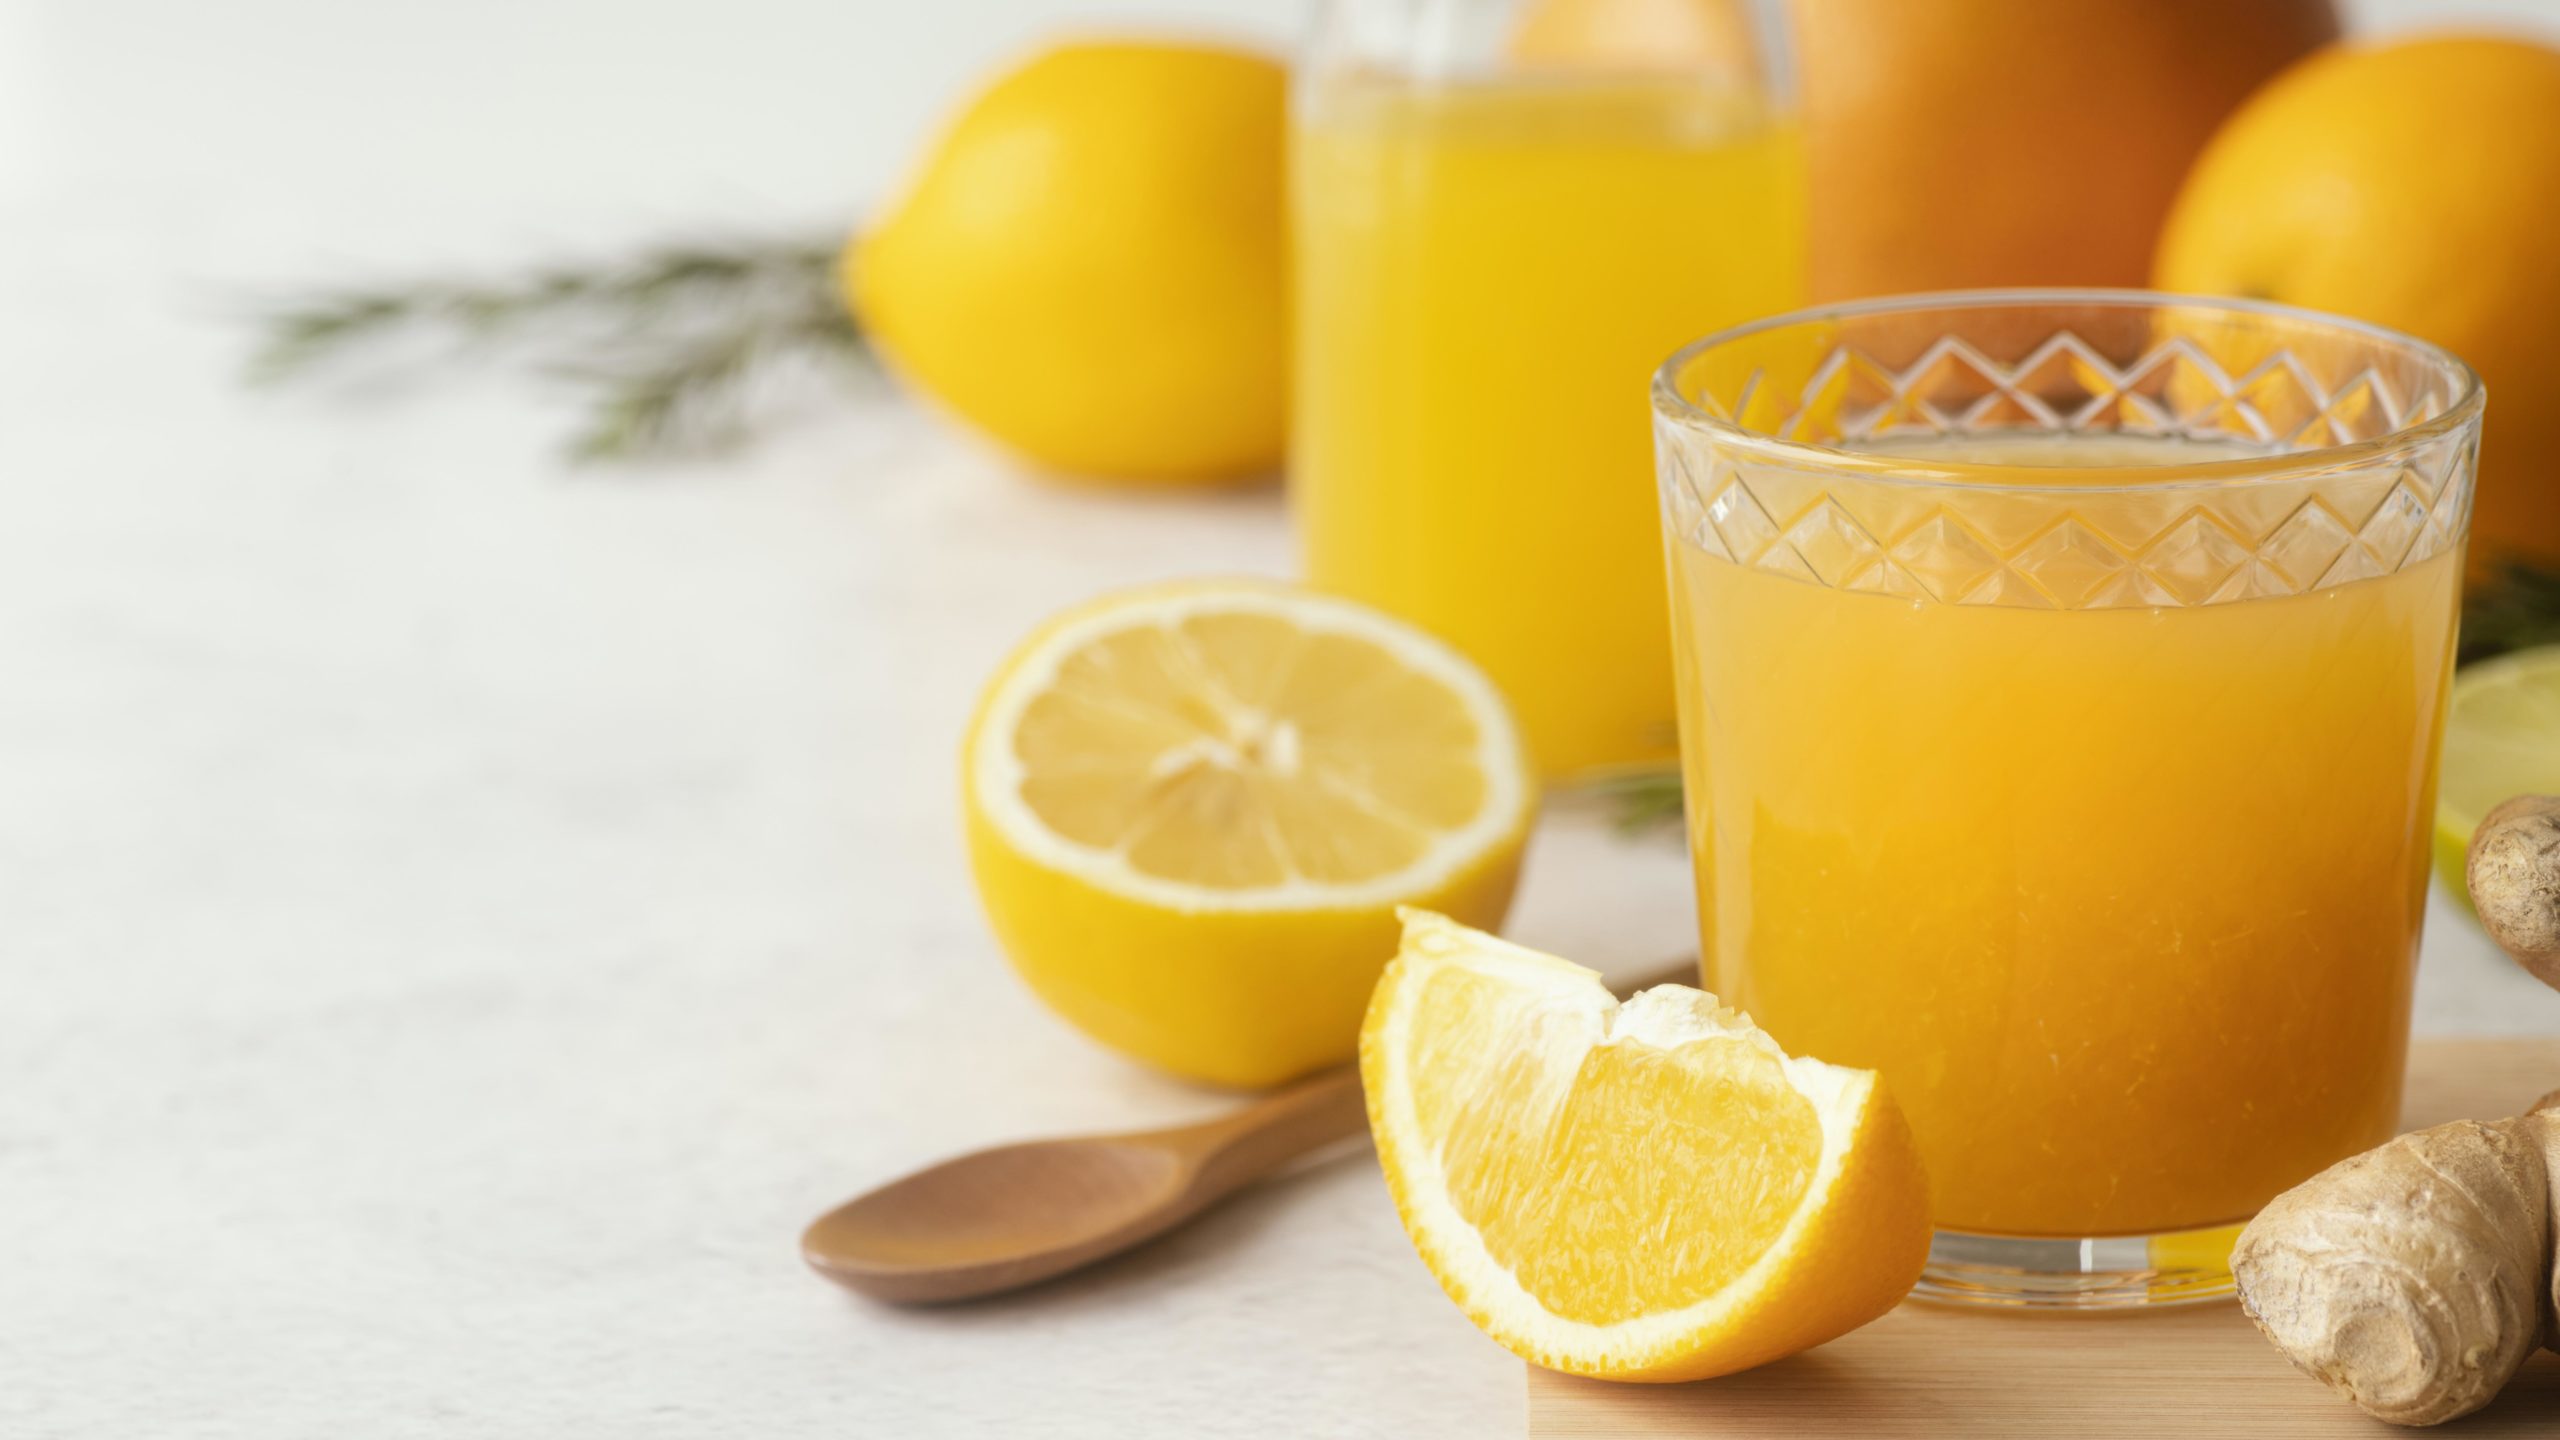 Drinking a daily glass of 100% orange juice is part of keeping a healthy, balanced diet – it contributes to the recommended five portions of fruit & vegetable intake per day